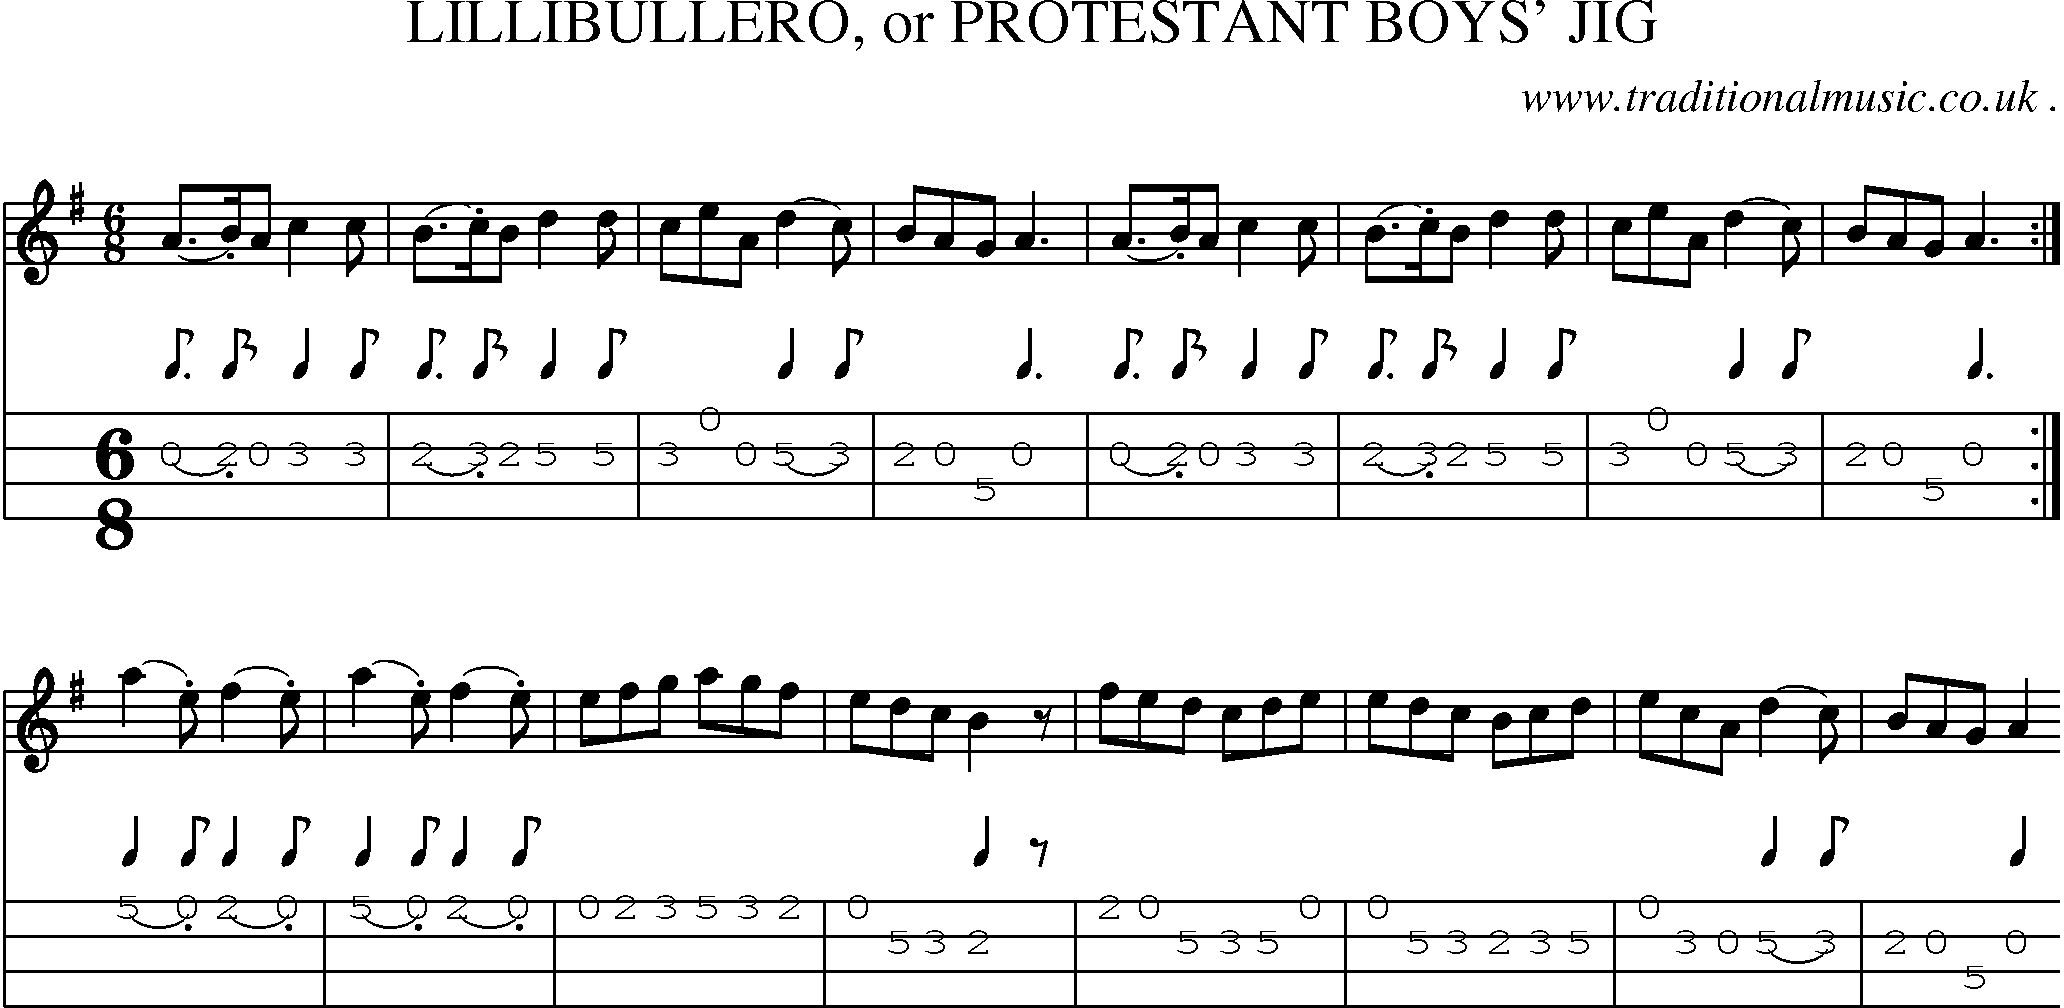 Sheet-Music and Mandolin Tabs for Lillibullero Or Protestant Boys Jig